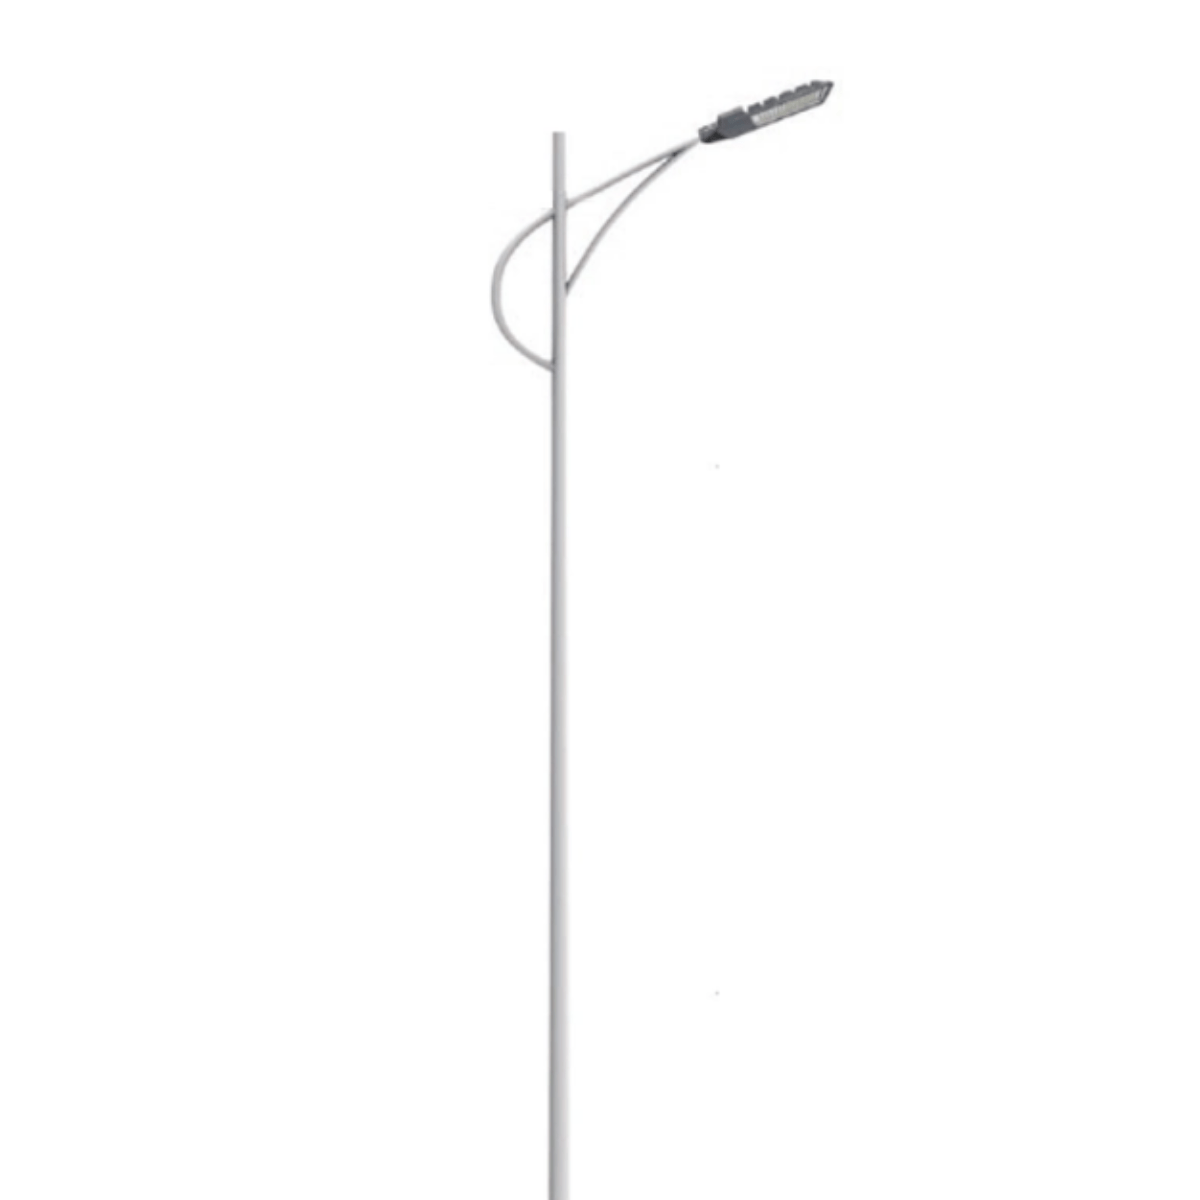 Buy Outdoor Galvanized Street Light Pole 3M - JY-LB1 | Shop at Supply Master Accra, Ghana Lamps & Lightings Buy Tools hardware Building materials